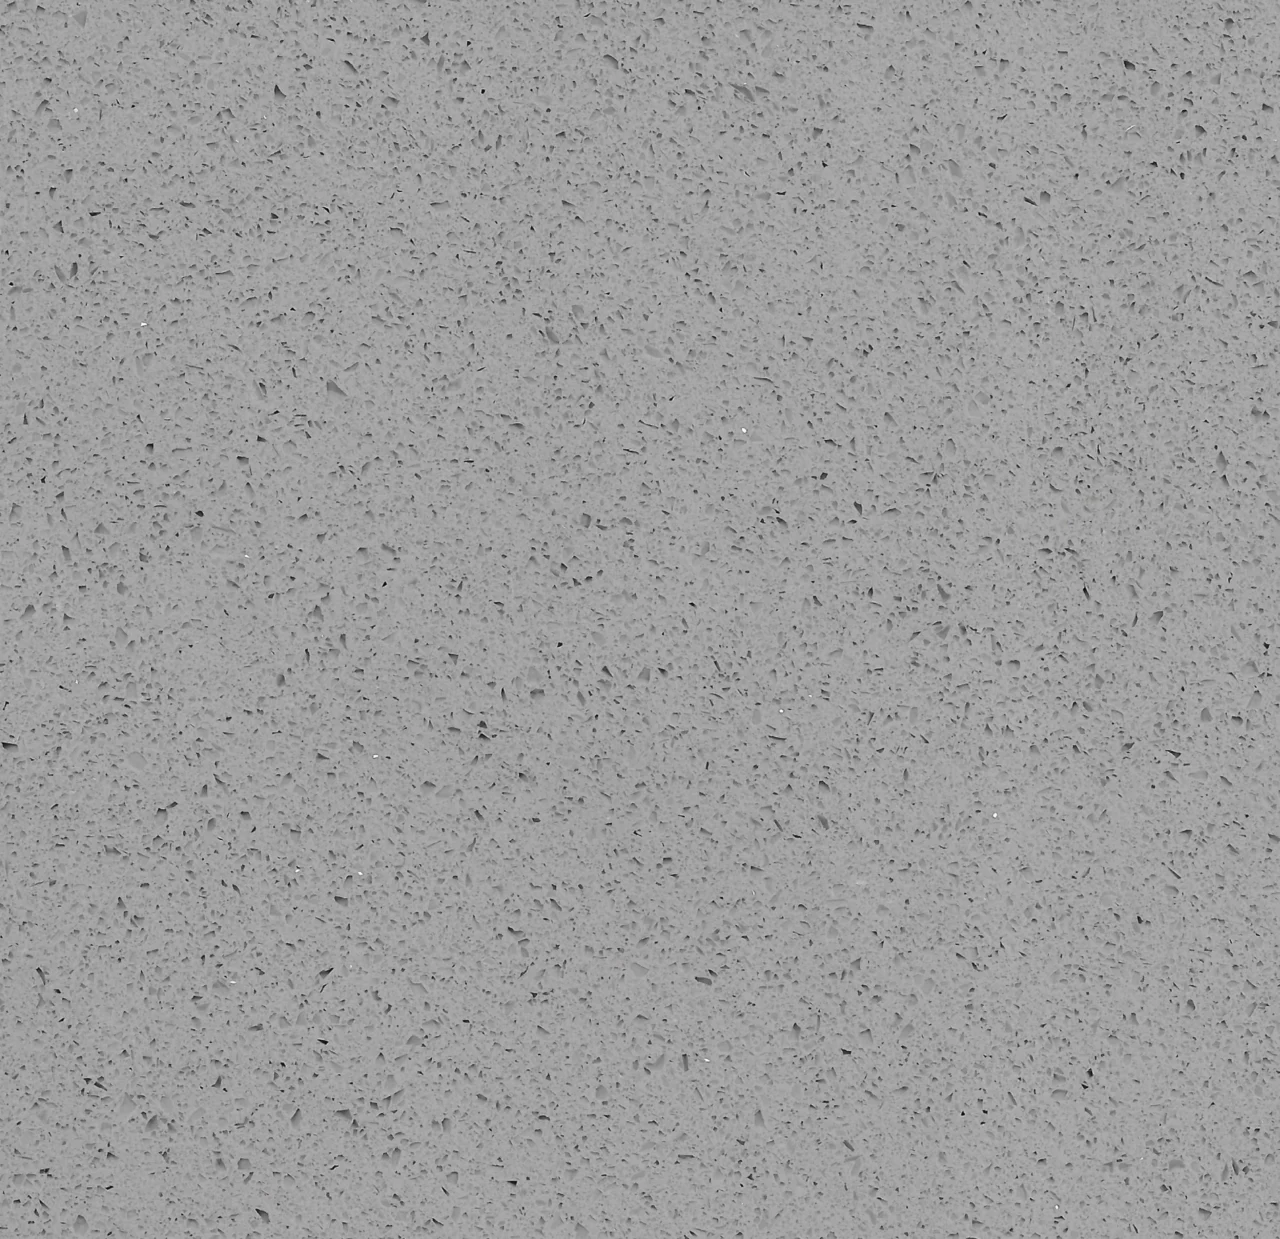 Close-up of a grey SEH Quartz worktop in Twinkle Grey